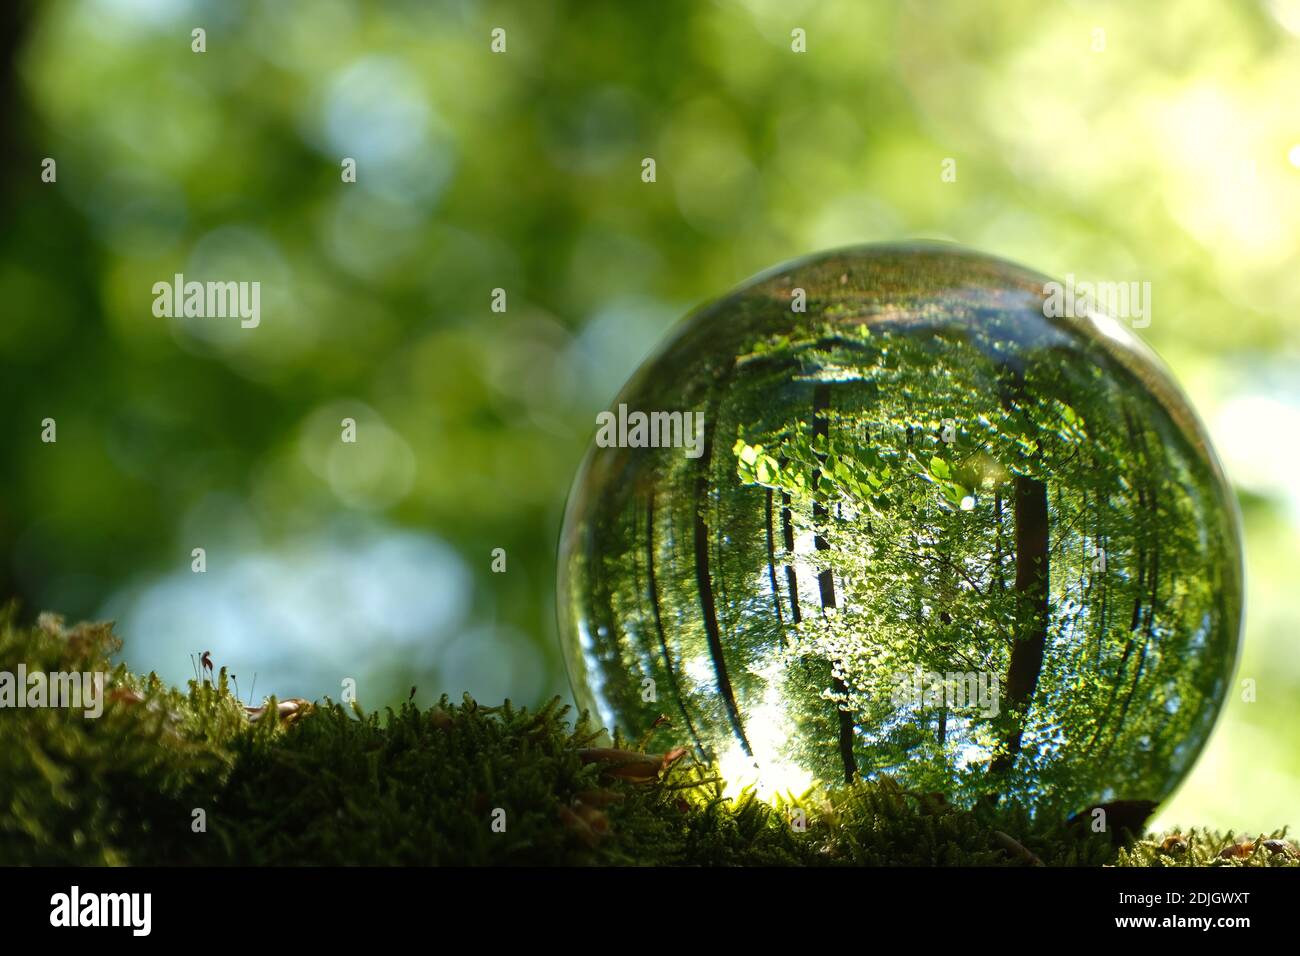 Reflection Of Bright Young Green Spring Leaves, Trees And Moss Inside Lensball. Stock Photo